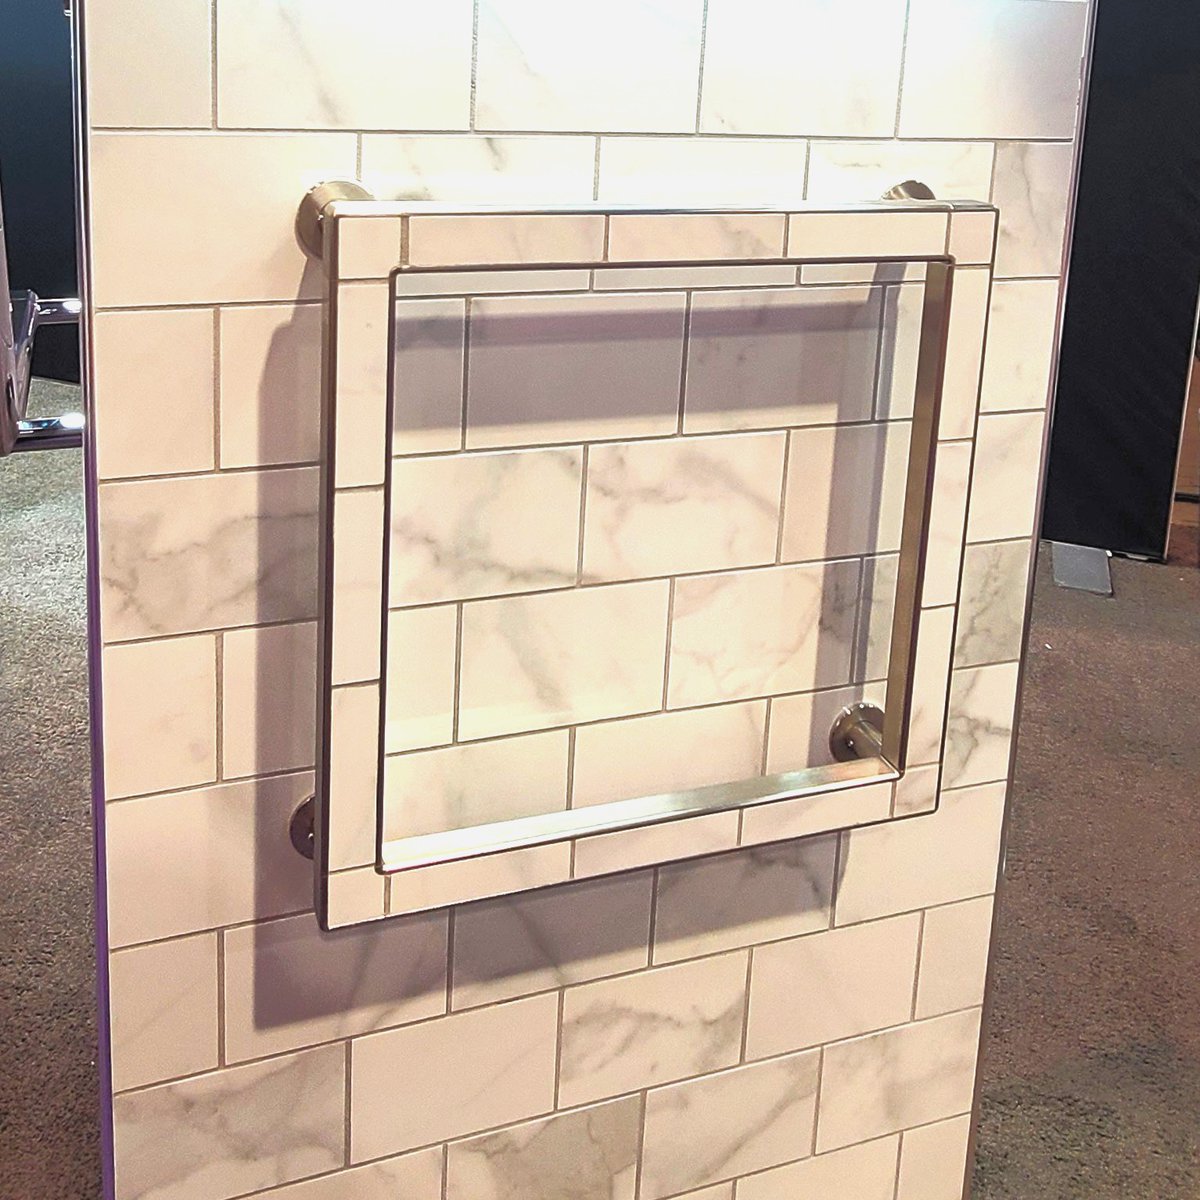 Isn't this a cool idea by Felyl?  You can tile your towel bars and #bathroomhardware to match your tub or shower surround! 

Would you add this to you #bathroomremodel? 
#RenoNv #RenoTahoe#RenoLocal #LuxuryBathroom #BathroomDesign #BathroomTile